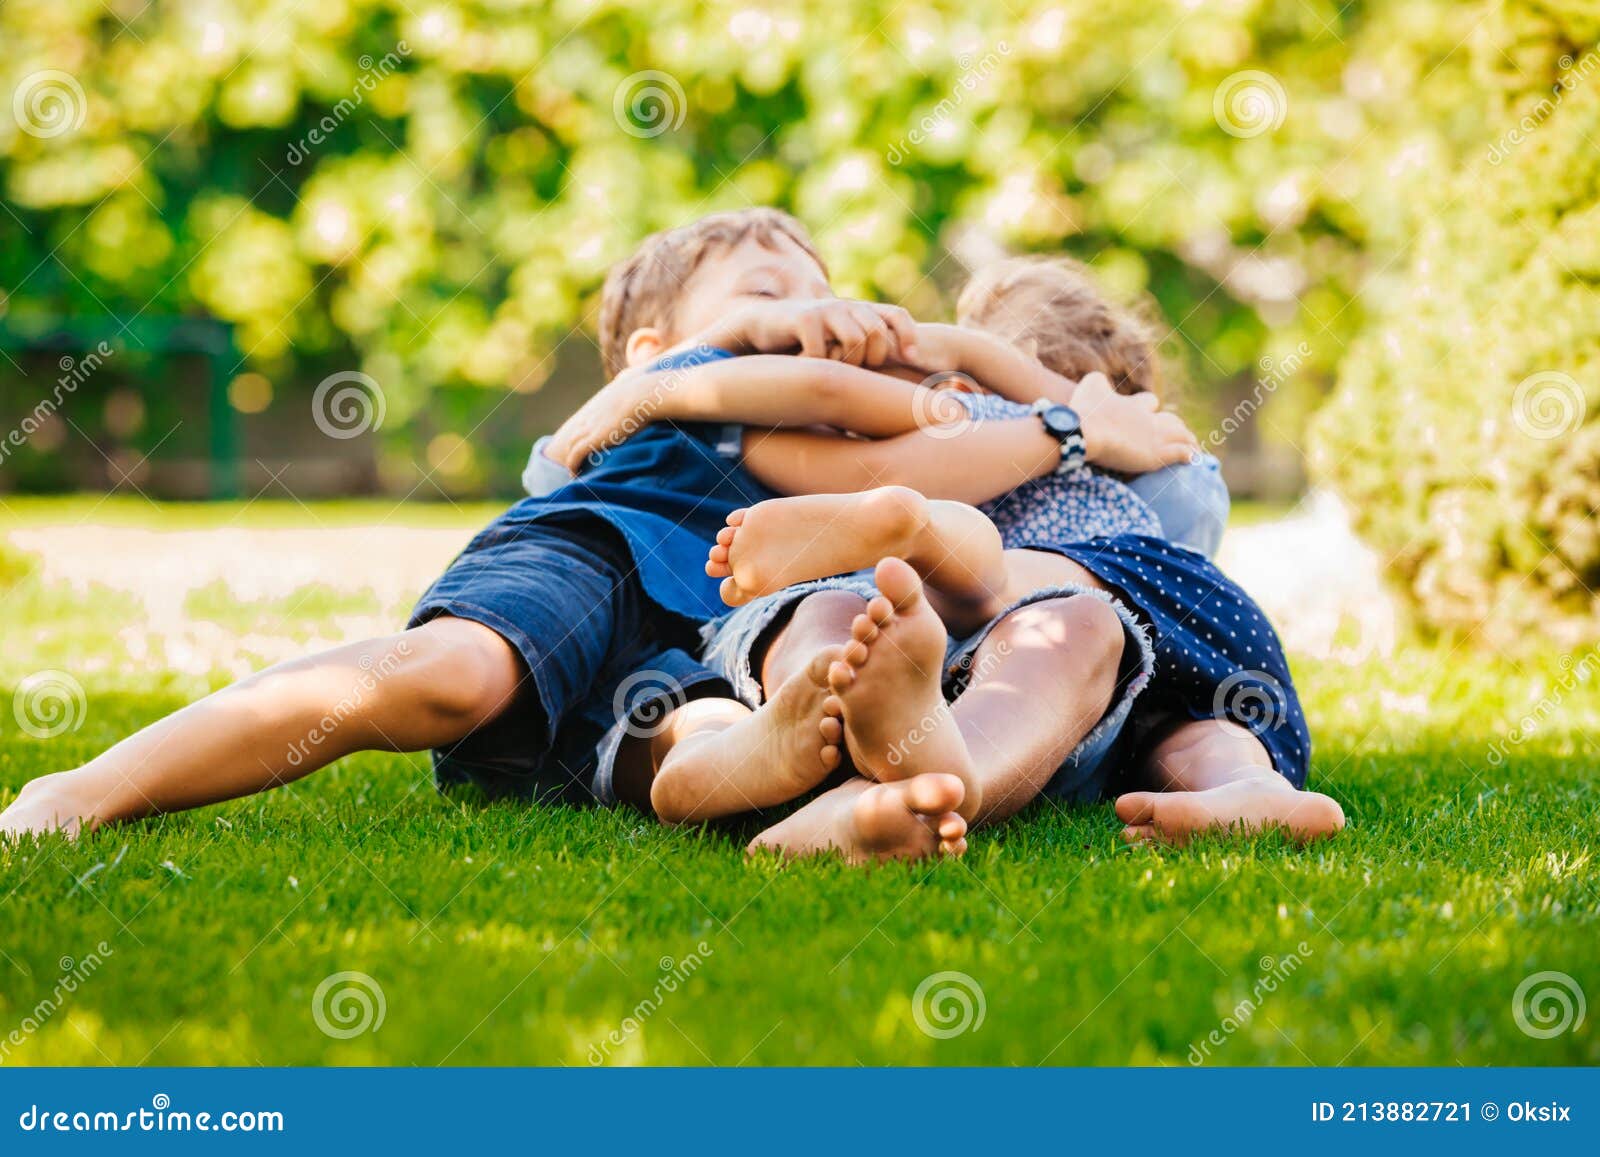 Playful Siblings Having Fun On A Green Lawn Stock Image Image Of